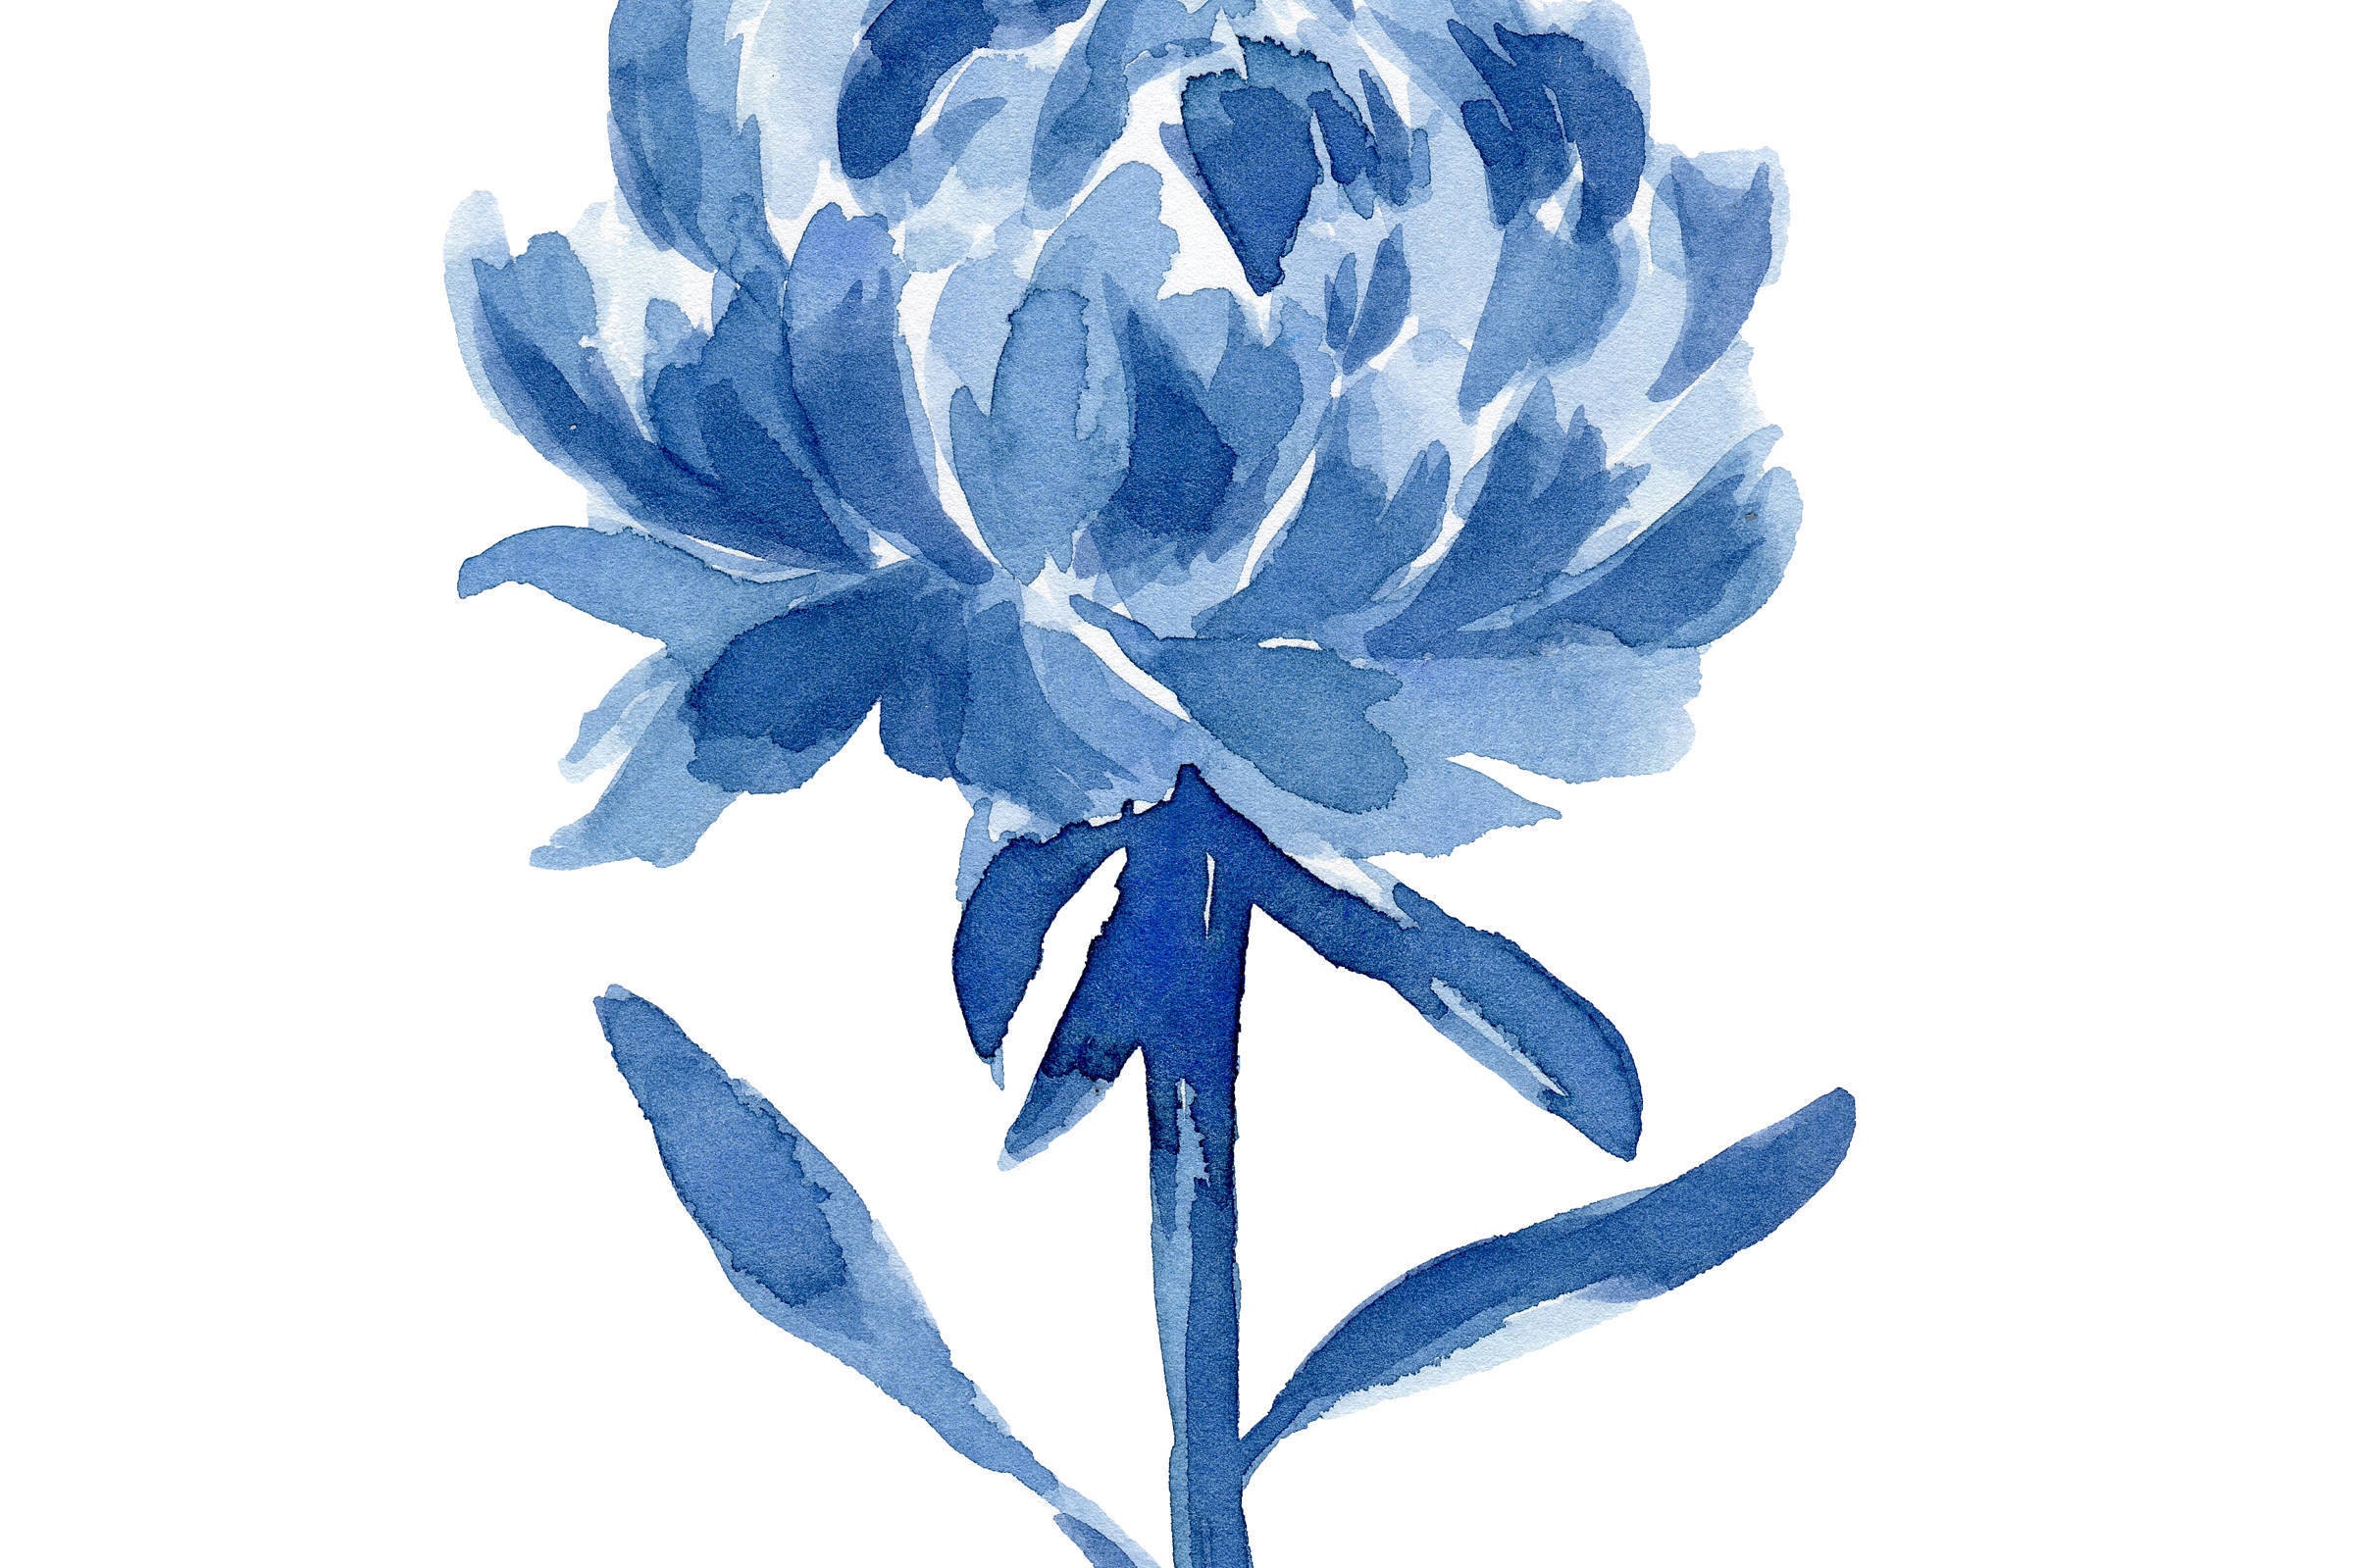  Blue  Peony Flowers  Set 4 Abstract  Peonies Watercolor 